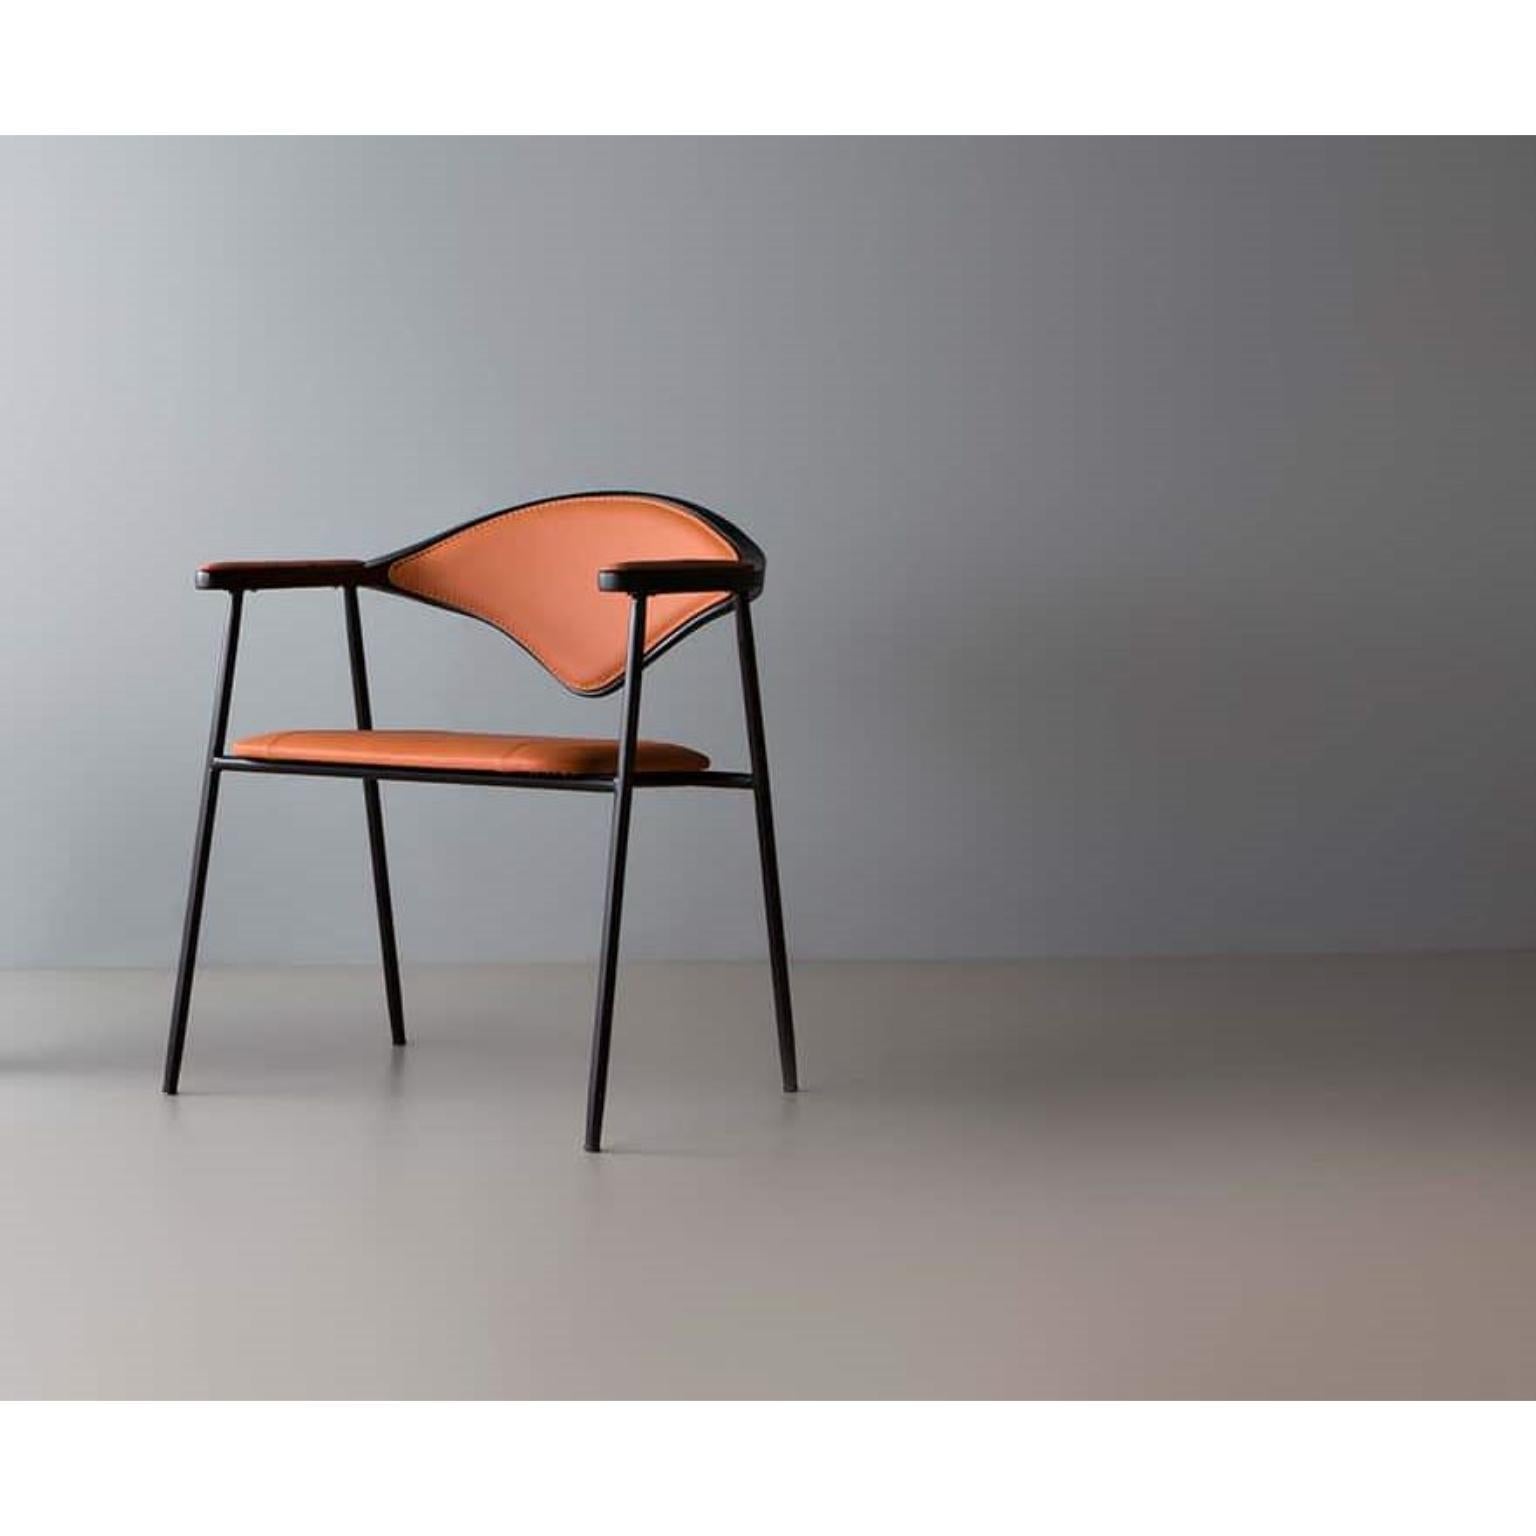 Dhira Chair by Doimo Brasil
Dimensions: W 63 x D 60 x H 74 cm 
Materials: Metal and fiberglass chair with upholstered seat..


With the intention of providing good taste and personality, Doimo deciphers trends and follows the evolution of man and